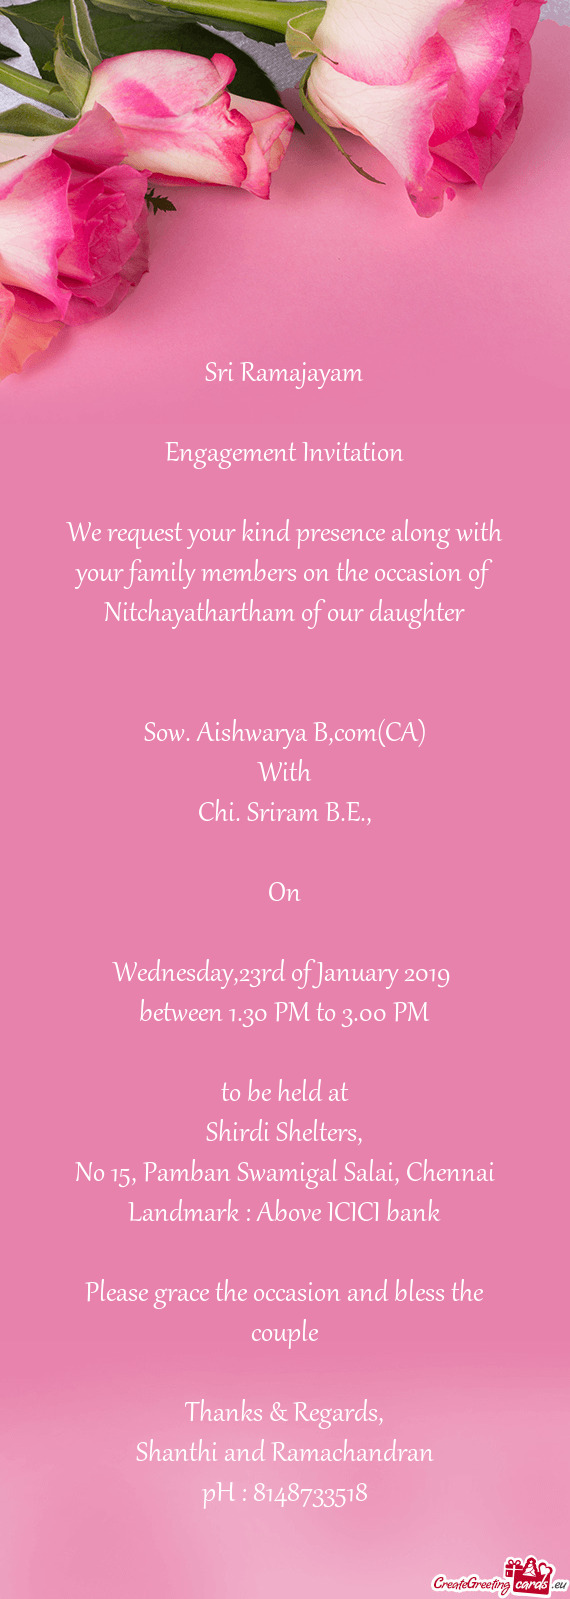 We request your kind presence along with your family members on the occasion of Nitchayathartham of